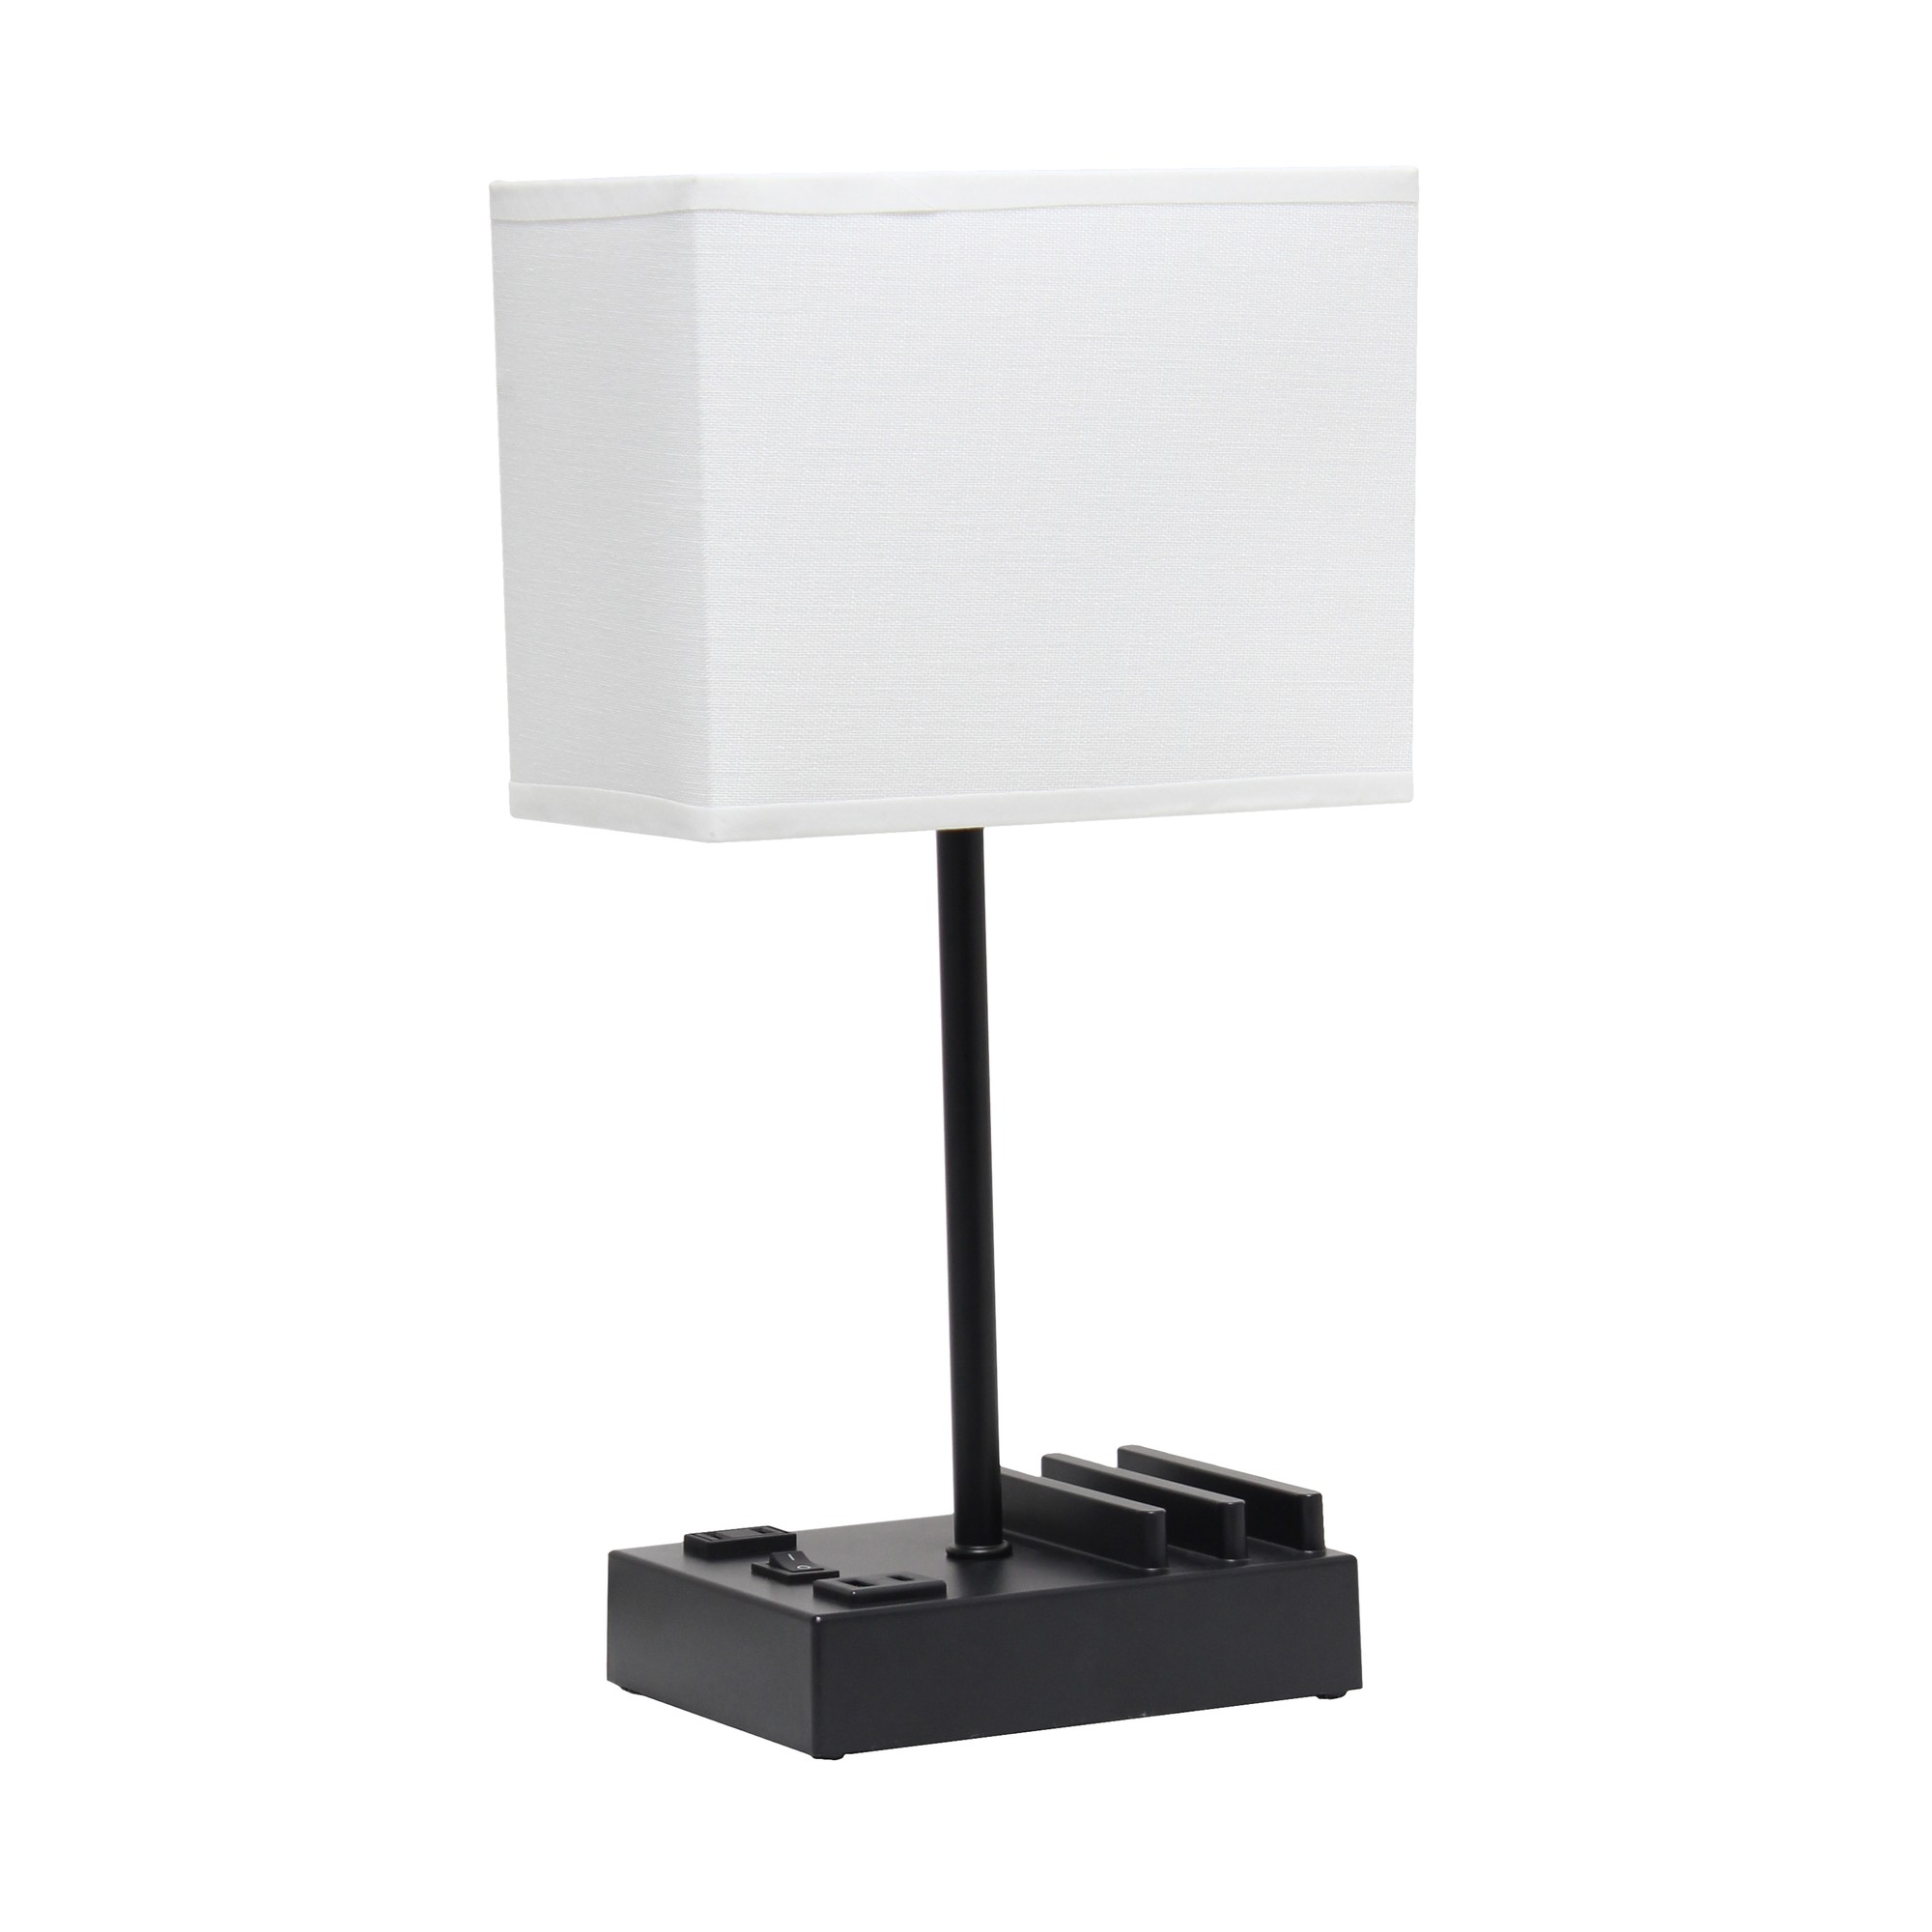 15.3" Table Lamp 2 USB Ports, Charging Outlet, Blk